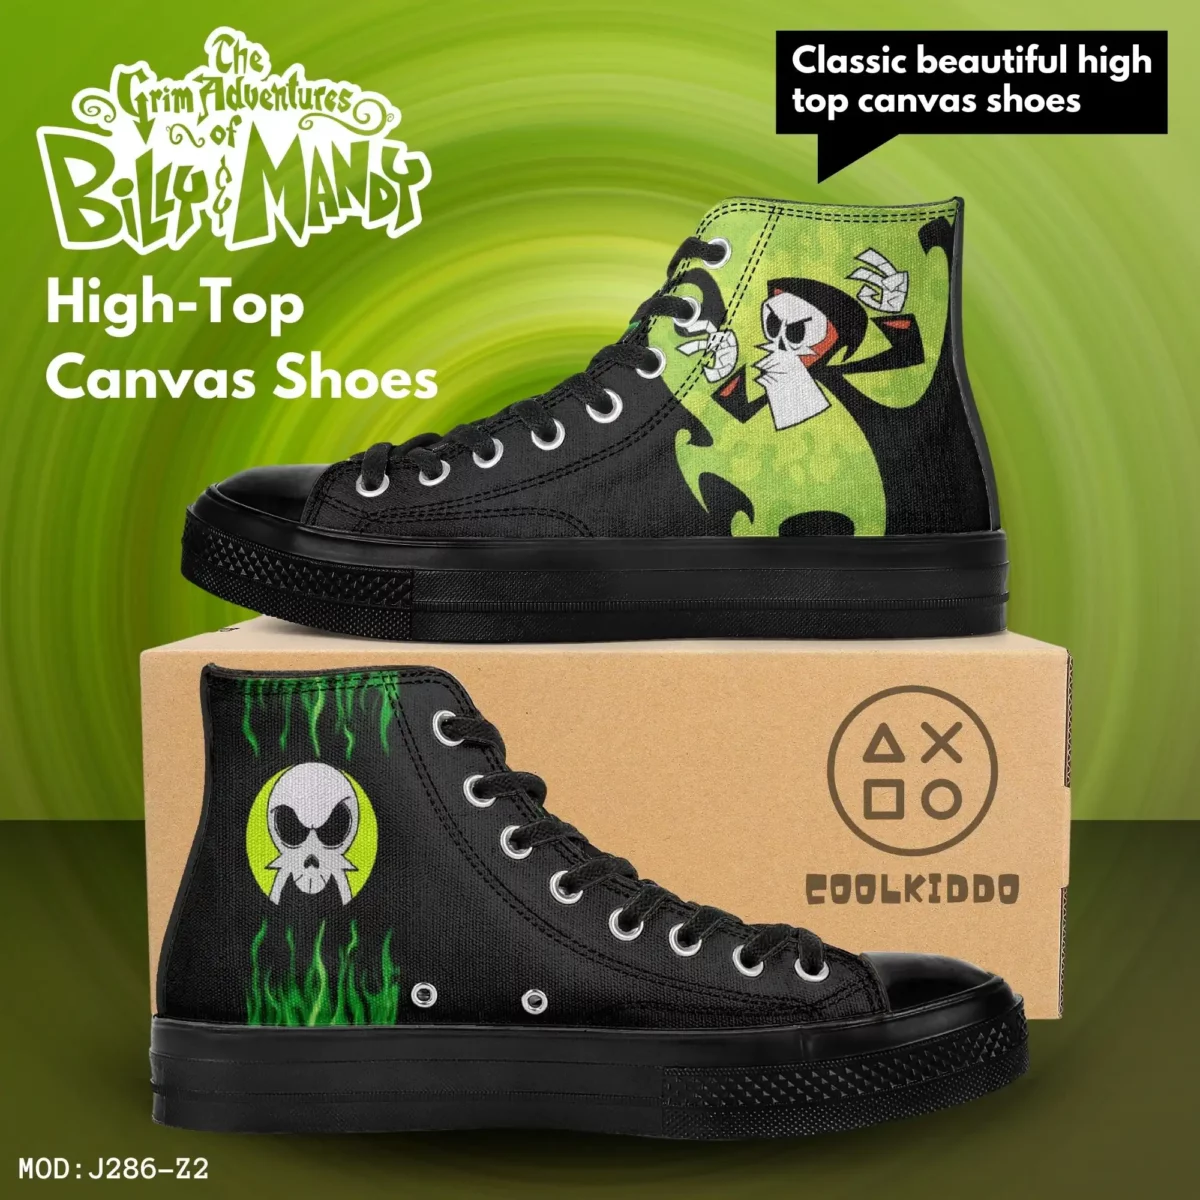 Grim Black and Green High-Top Canvas Shoes | From The Grim Adventures of Billy and Mandy | Adult/Youth – Black Sole Grim Sneakers Cool Kiddo 10